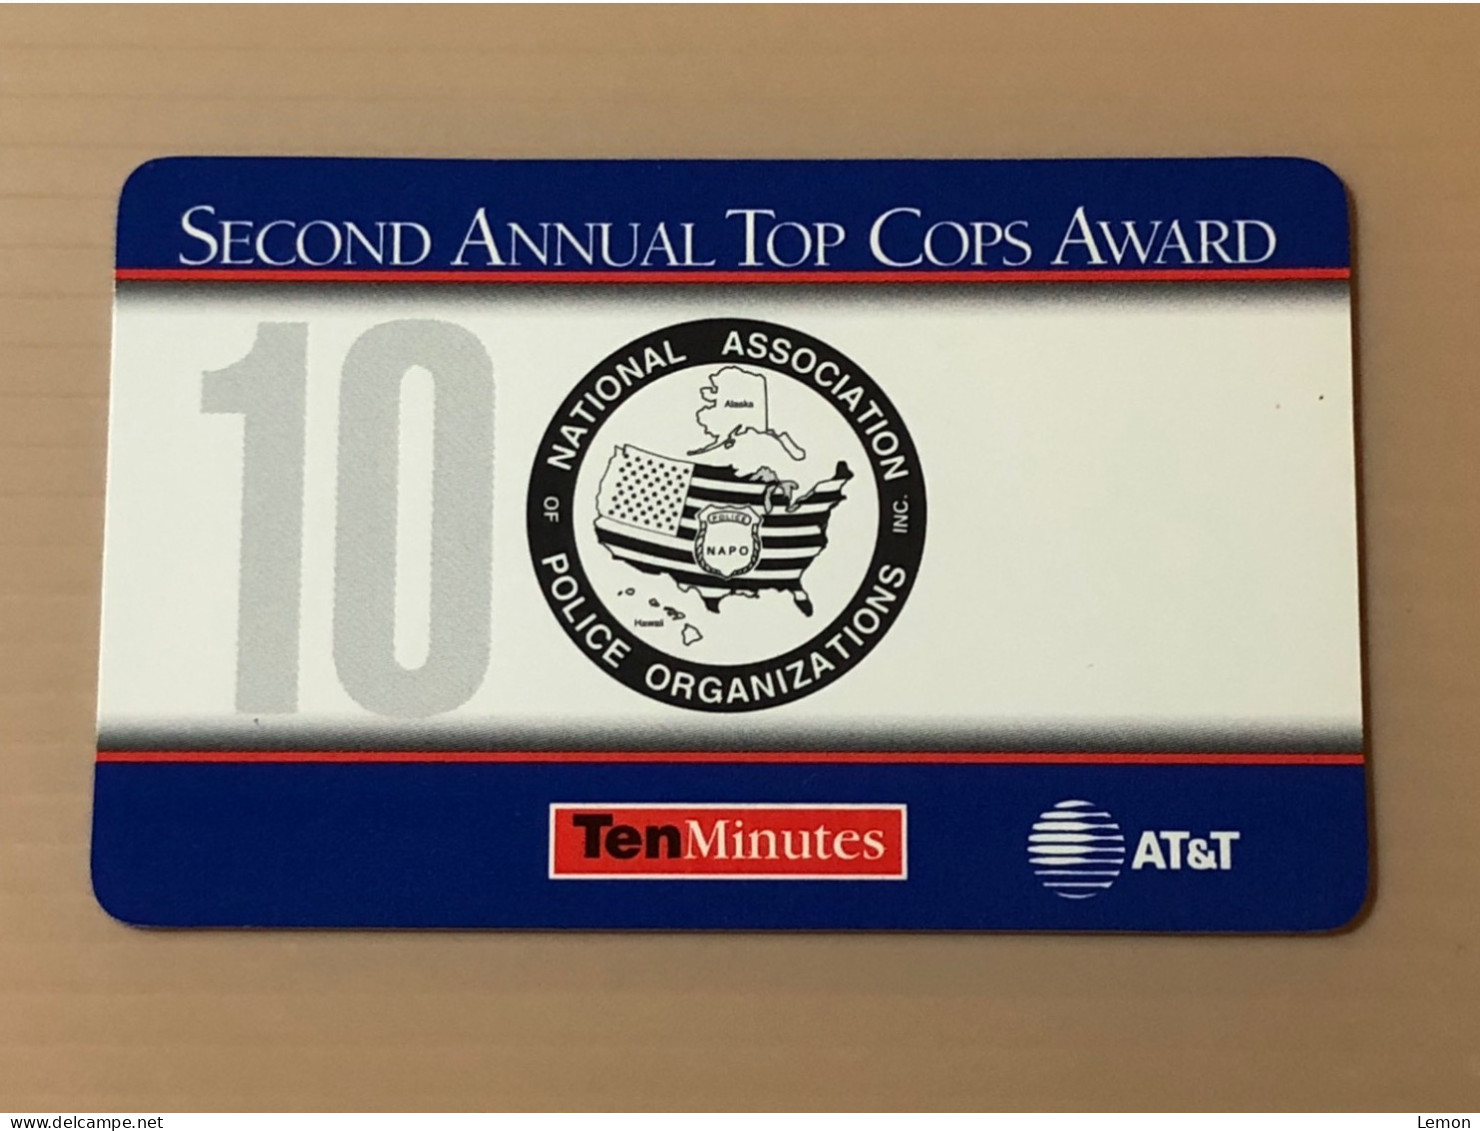 Mint USA UNITED STATES America Prepaid Telecard Phonecard, AT&T Annual Top Cops Award SAMPLE CARD, Set Of 1 Mint Card - Verzamelingen